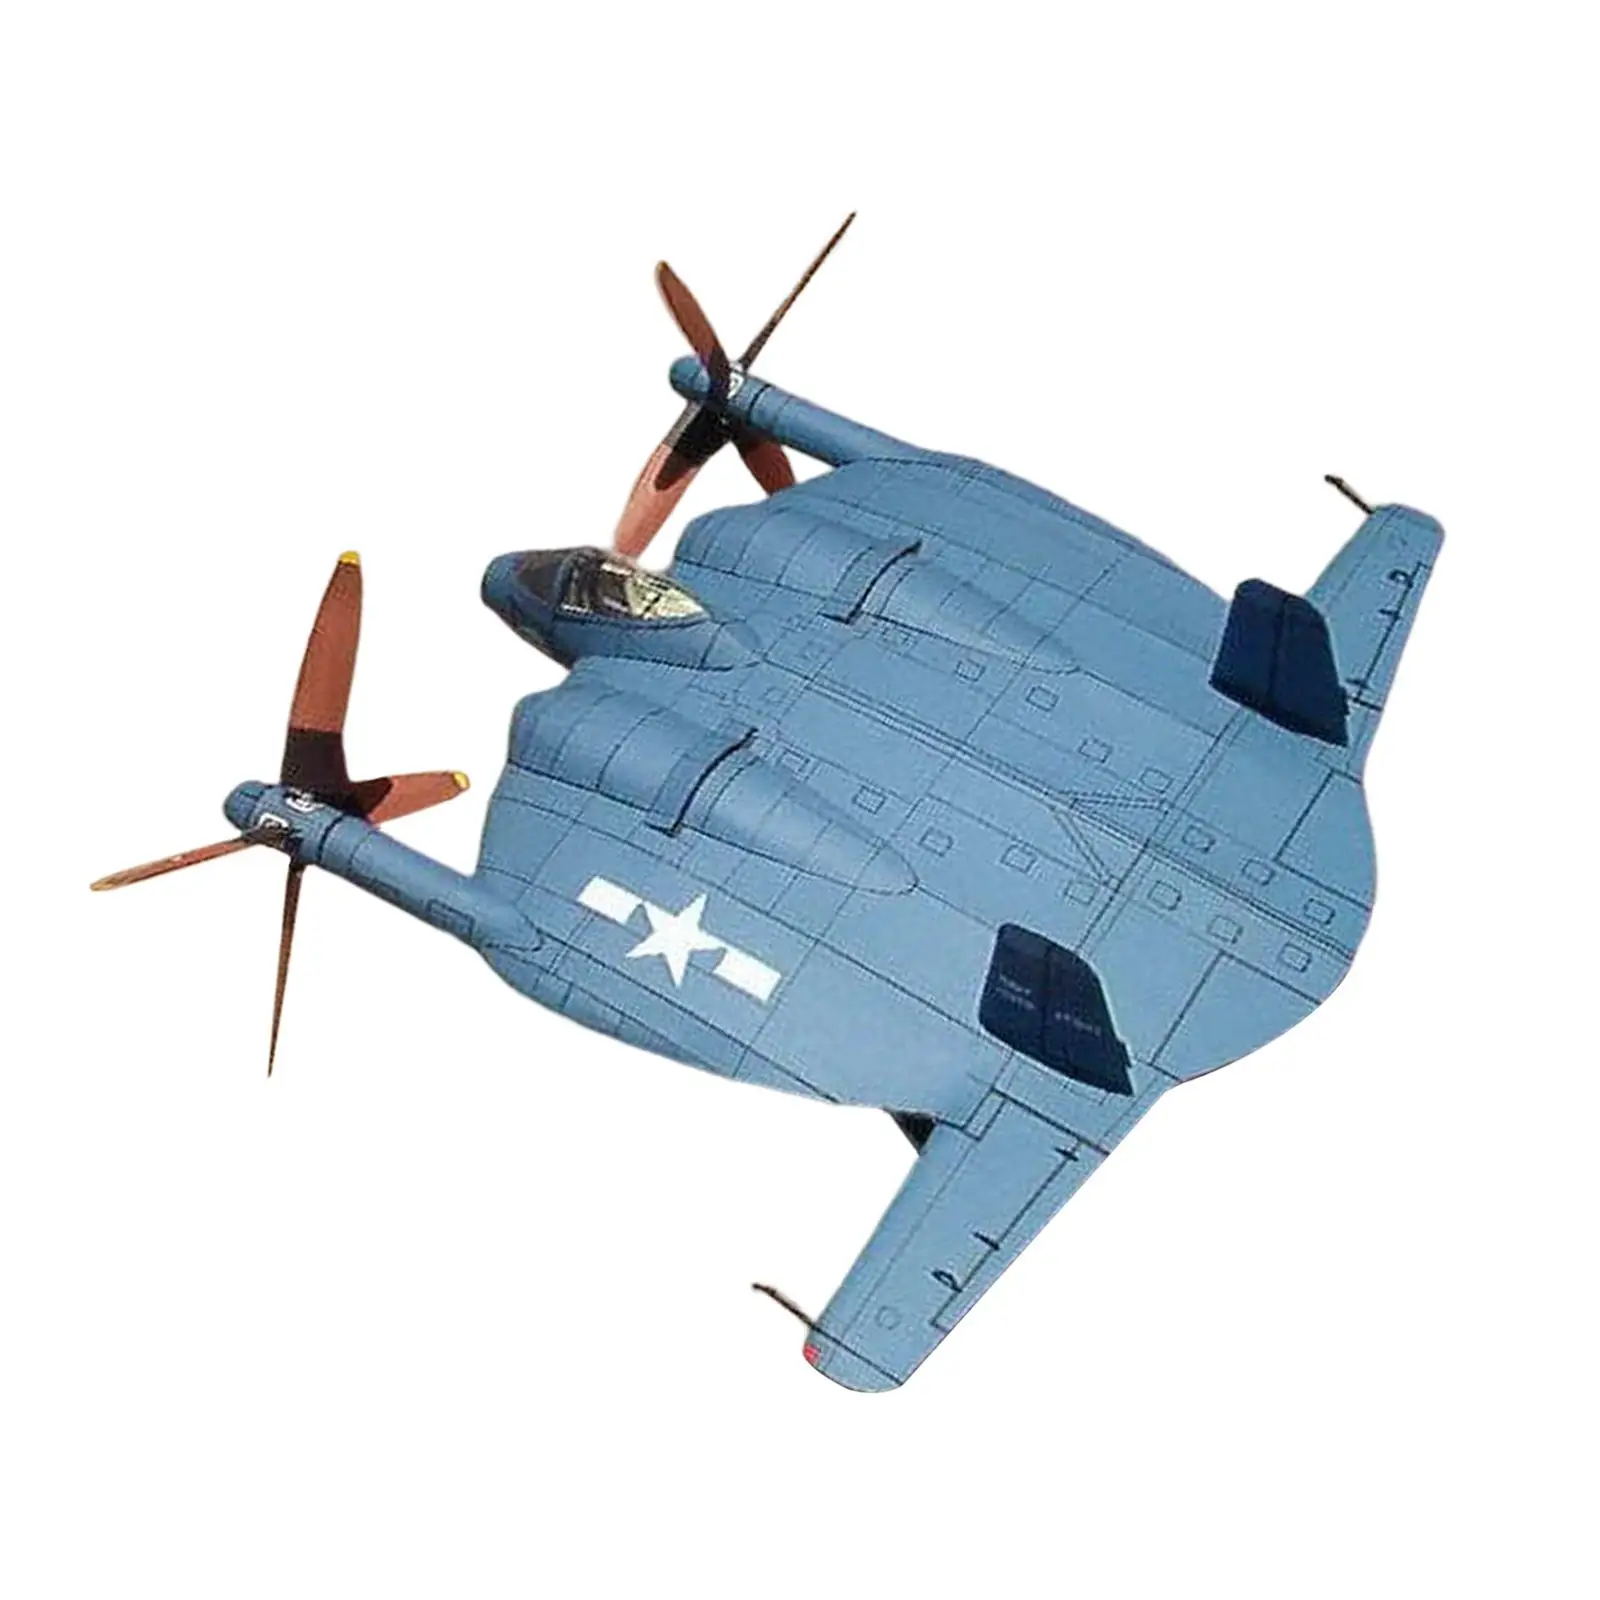 Air Aviation aircraft Paper Model Adults Collectables Simulation Papercraft Fighter Model Toy for Desk Shelf Decoration